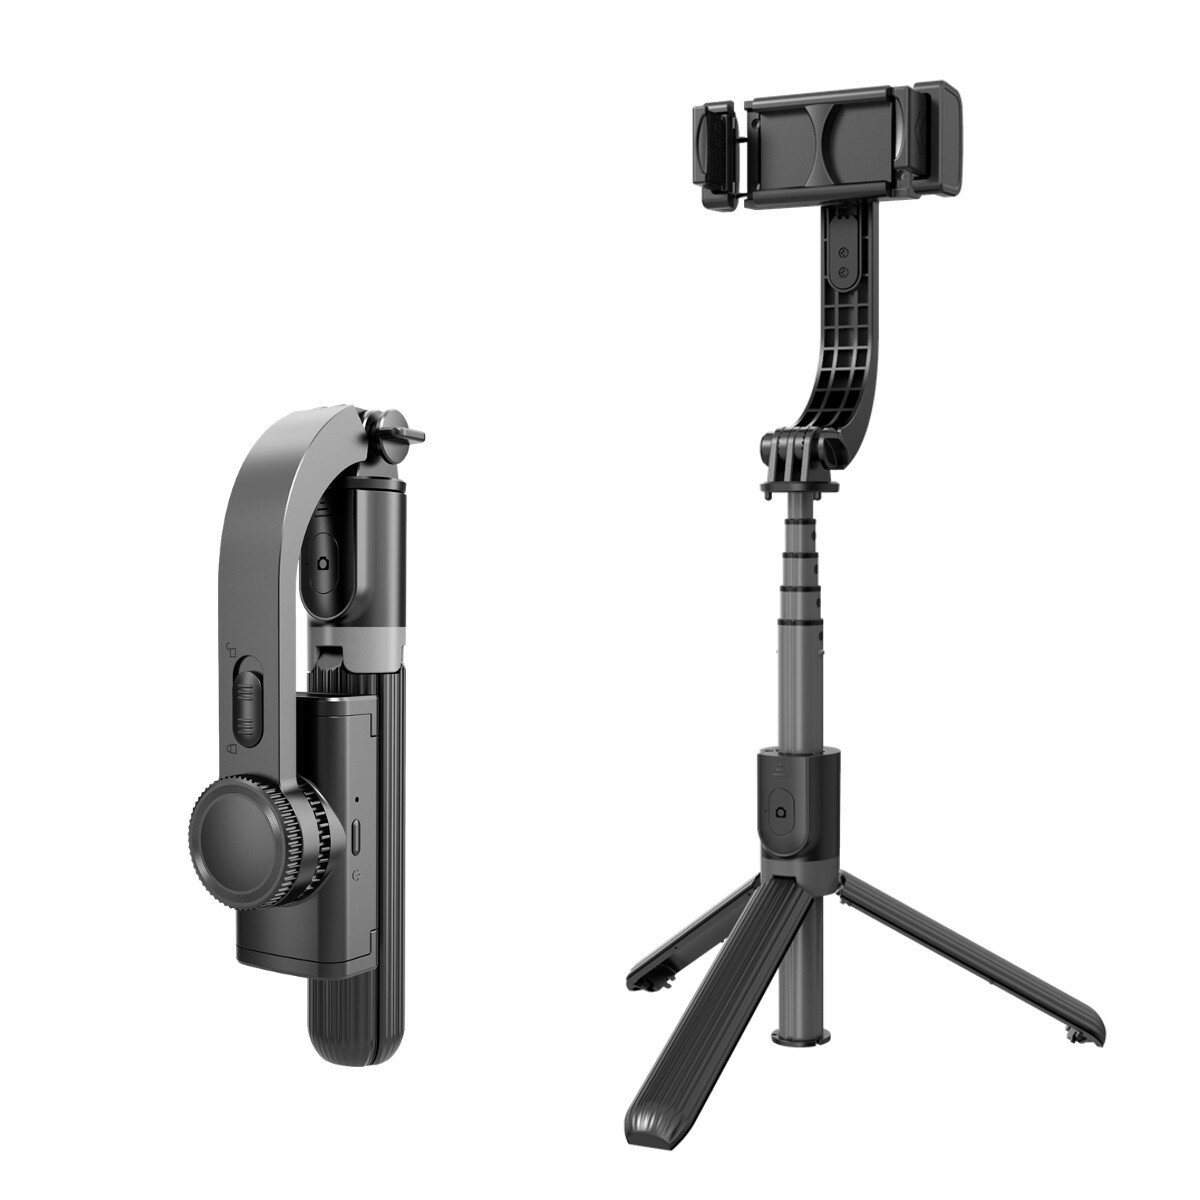 

Bakeey Universal Gimbal Stabilizer bluetooth Selfie Stick Tripod Universal Handheld Holder Stand Applicable for Phone Si